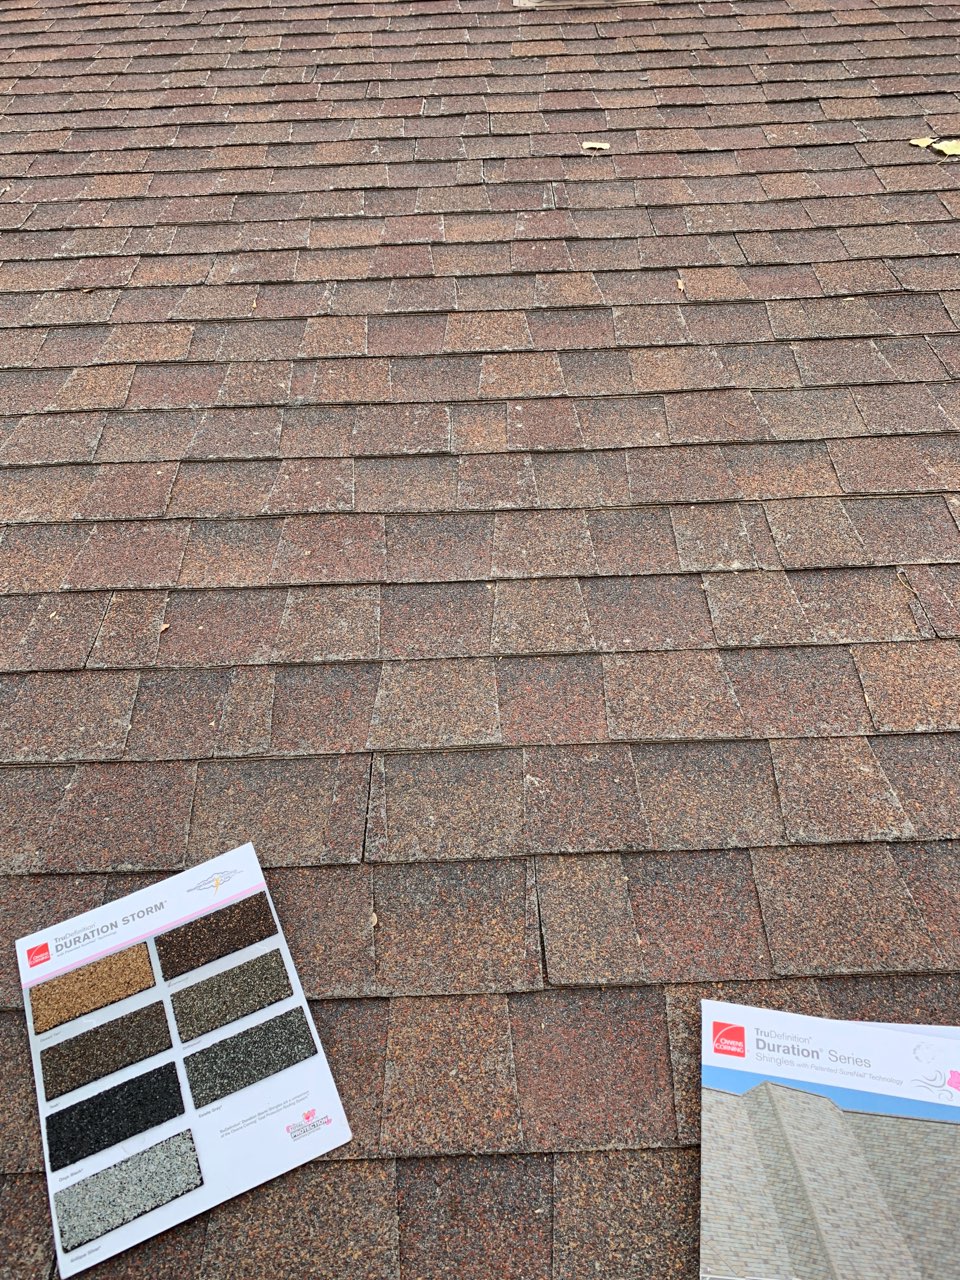 Rosner Roofing | 14600 Lowell Blvd, Broomfield, CO 80023 | Phone: (720) 277-1036